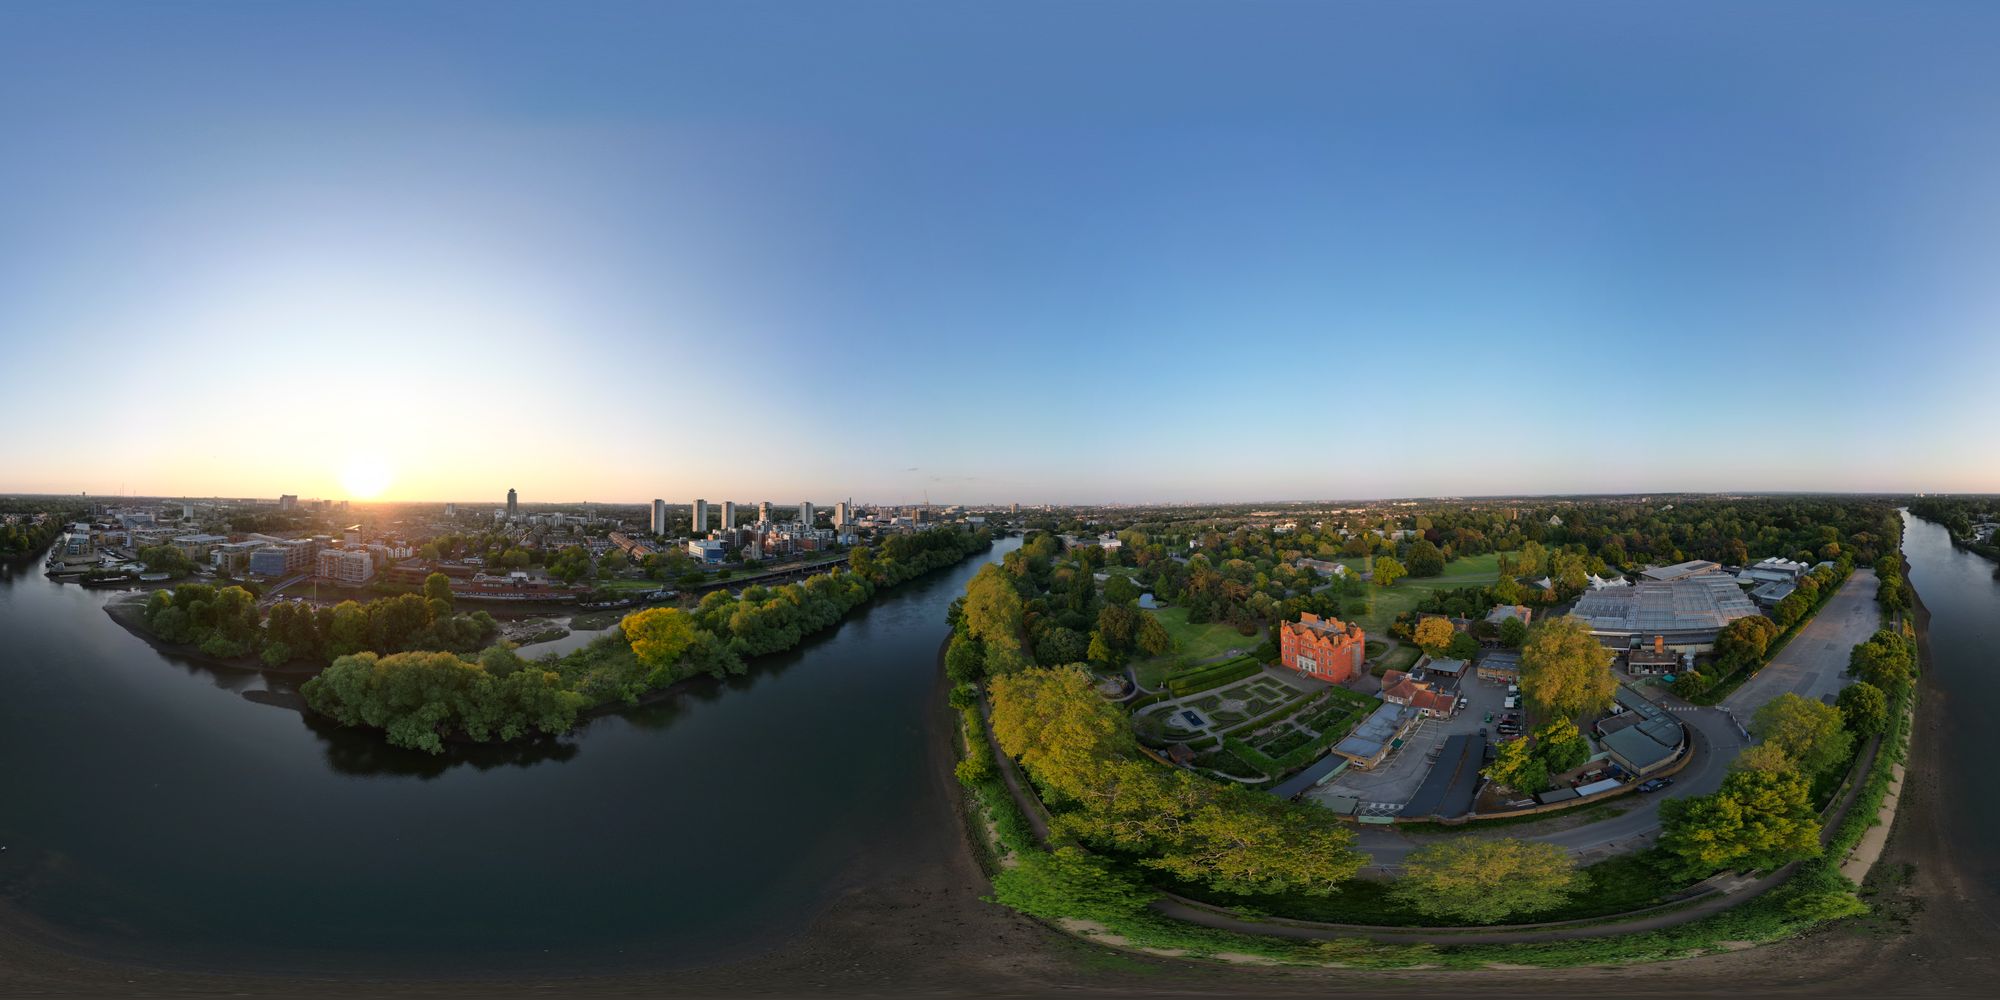 Be there: Kew Gardens and the Thames in glorious VR